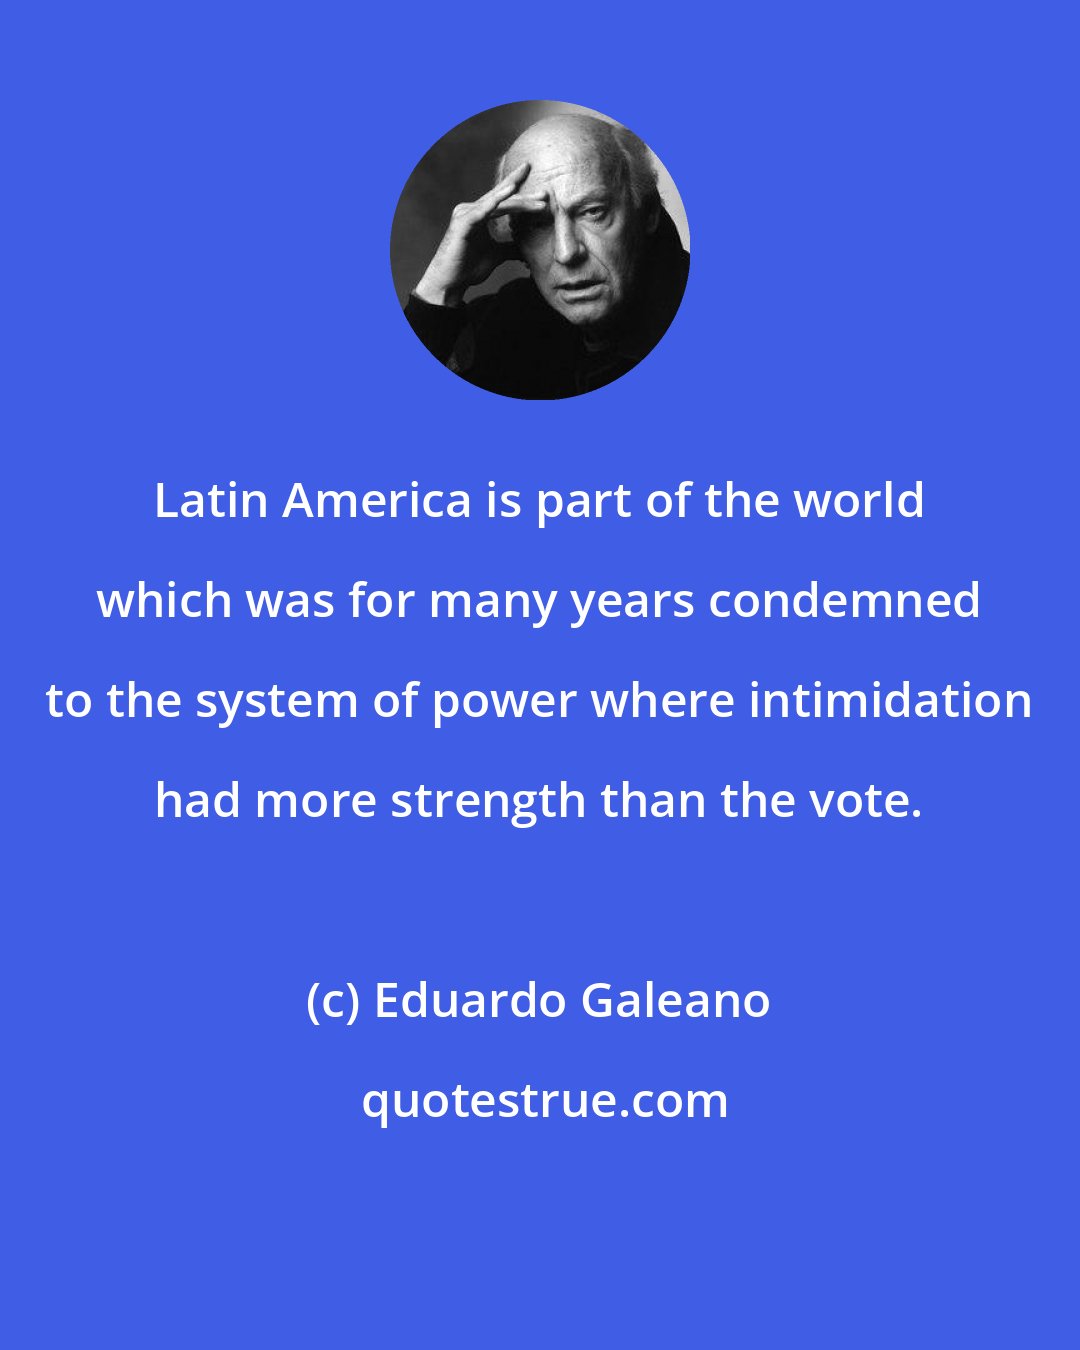 Eduardo Galeano: Latin America is part of the world which was for many years condemned to the system of power where intimidation had more strength than the vote.